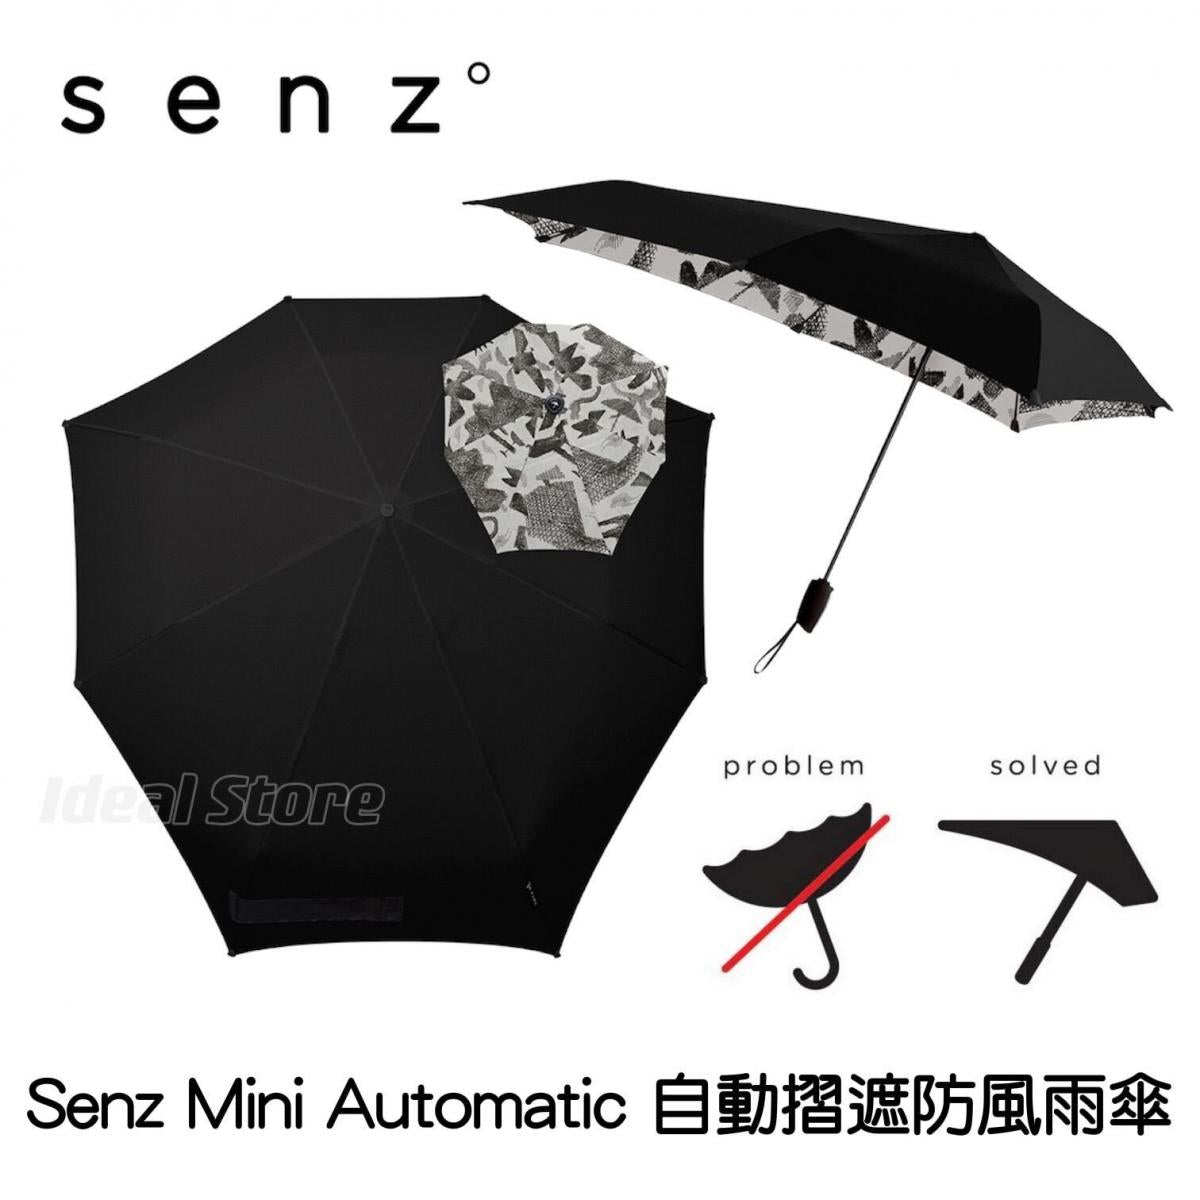 Netherlands Senz - Mini Automatic automatic folding windproof umbrella - Secret Fantasy black floral fabric base (1021066)｜SPF 50+｜Automatic opening and closing cover｜Windproof｜Sun protection｜Sunshade｜Shrinking cover